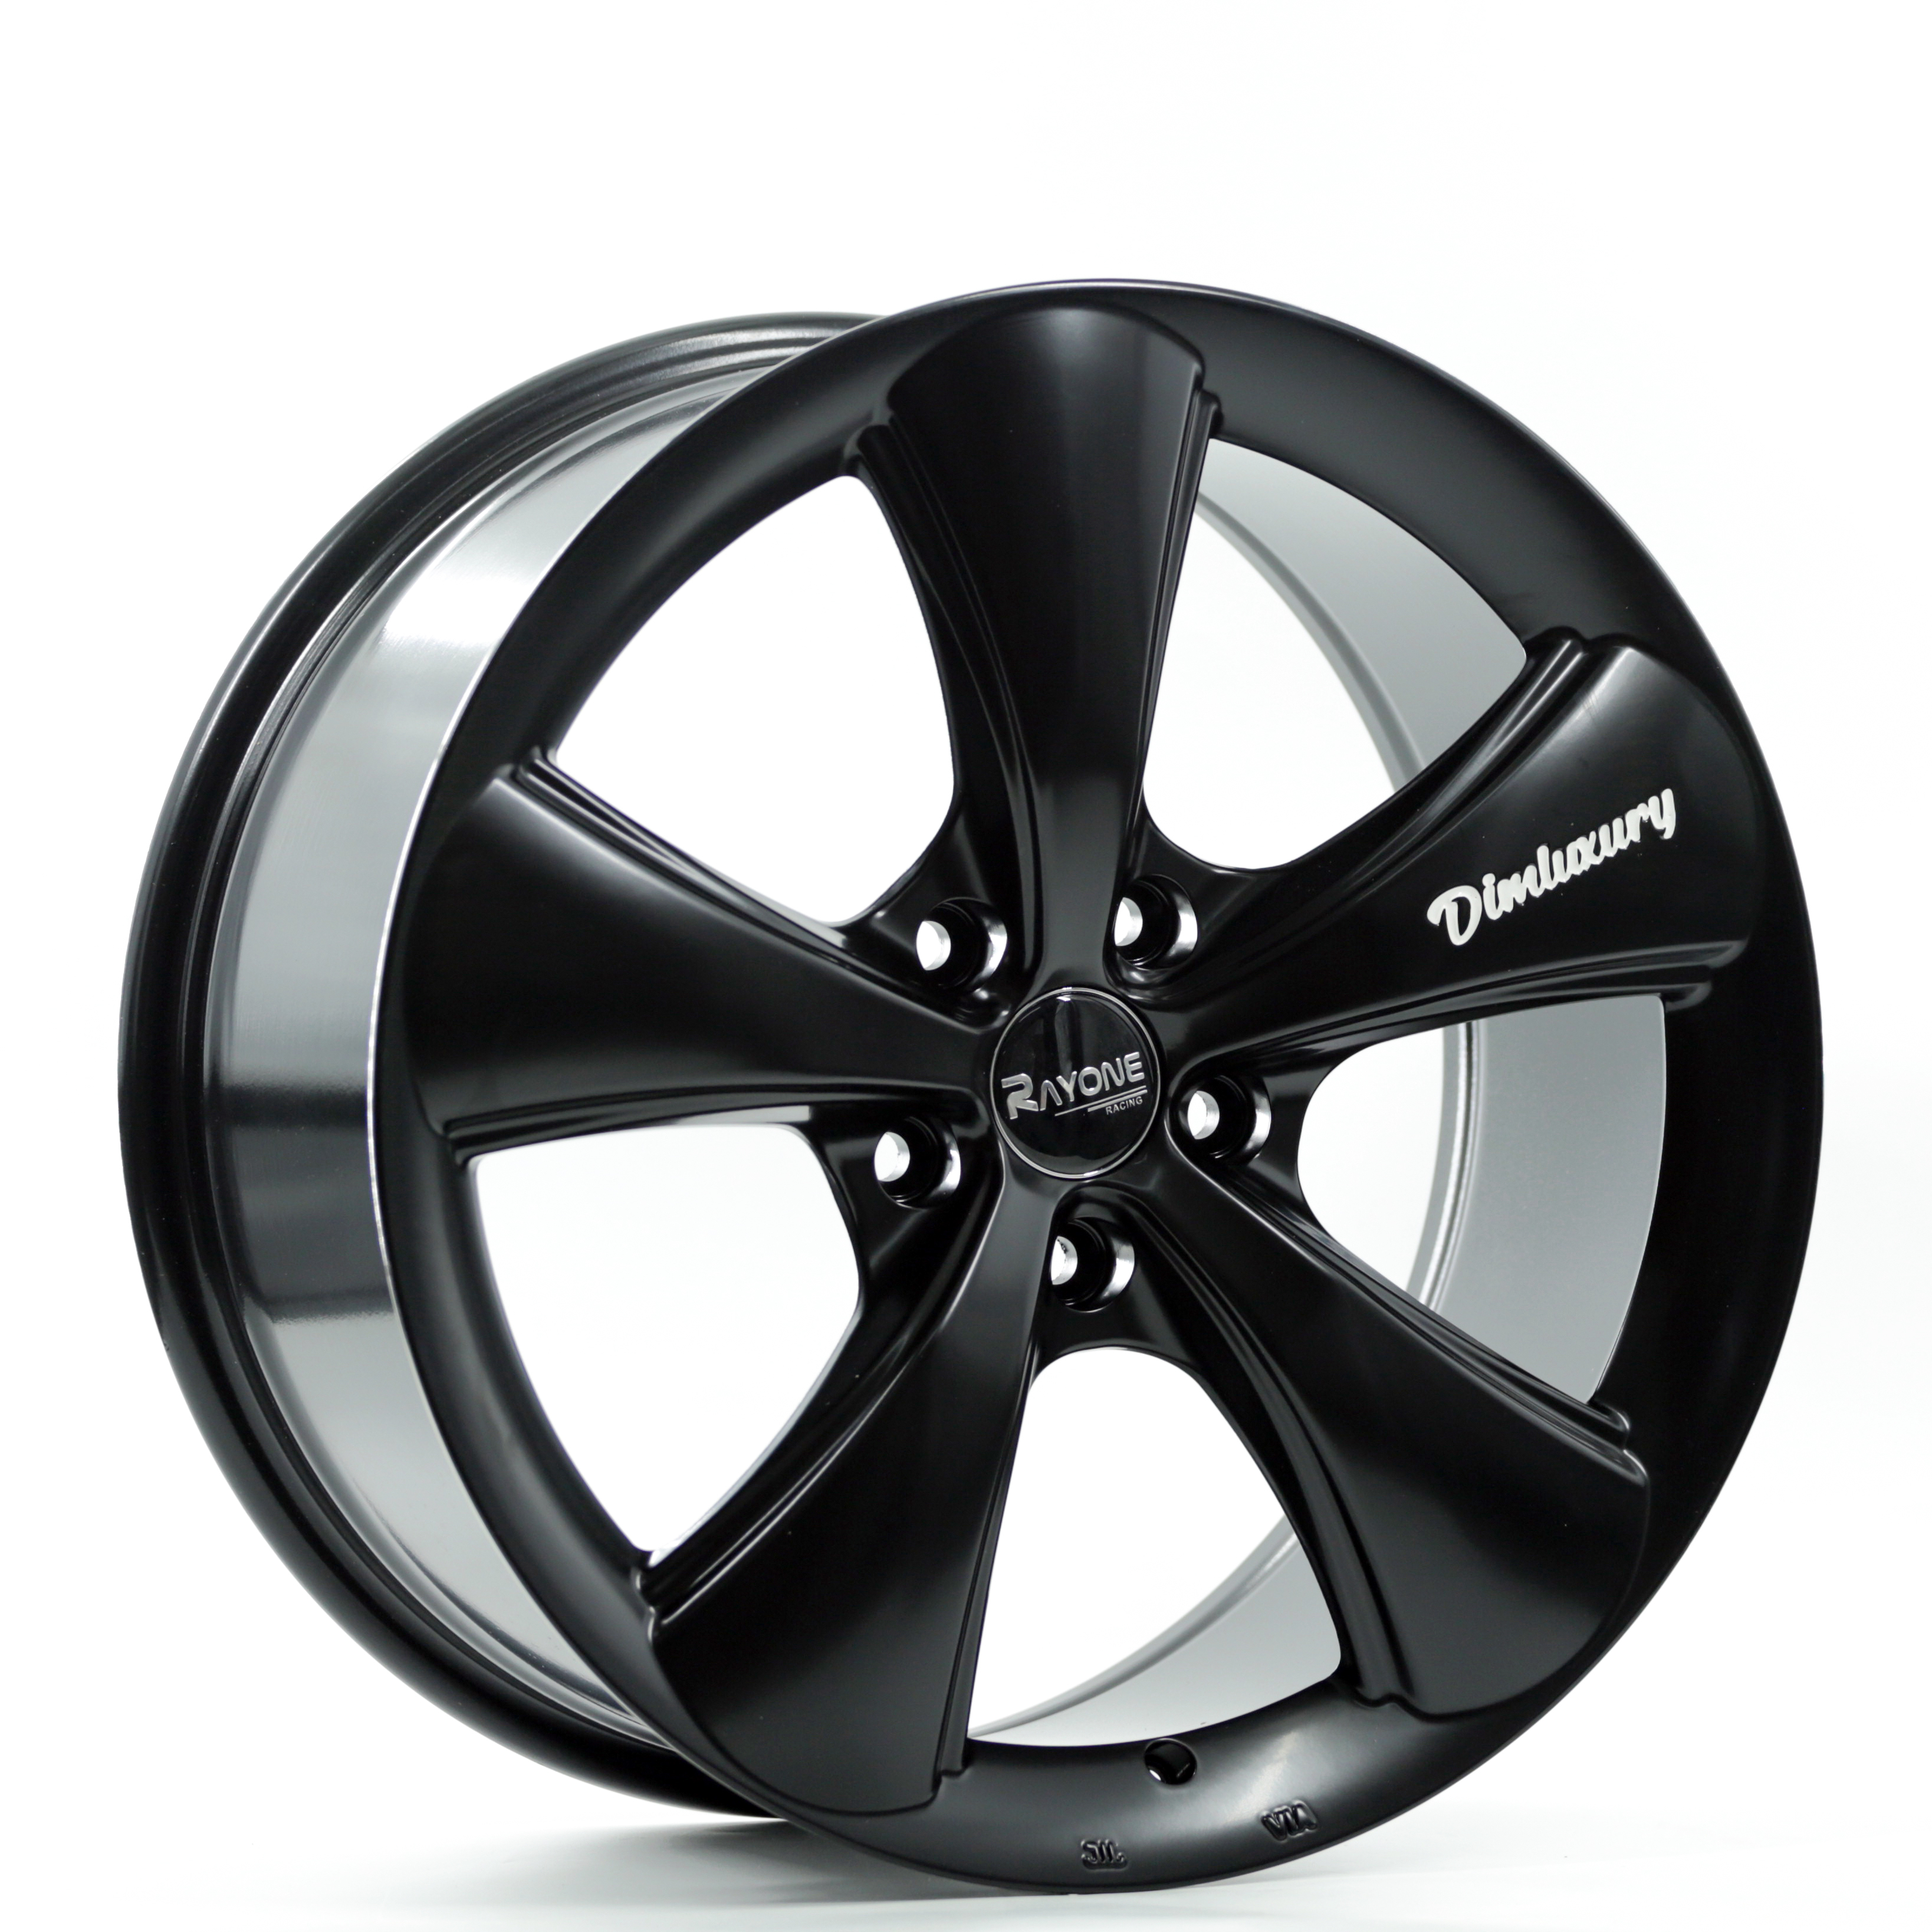 Rayone China Alloy Wheels Factory 18/19inch For Racing Car